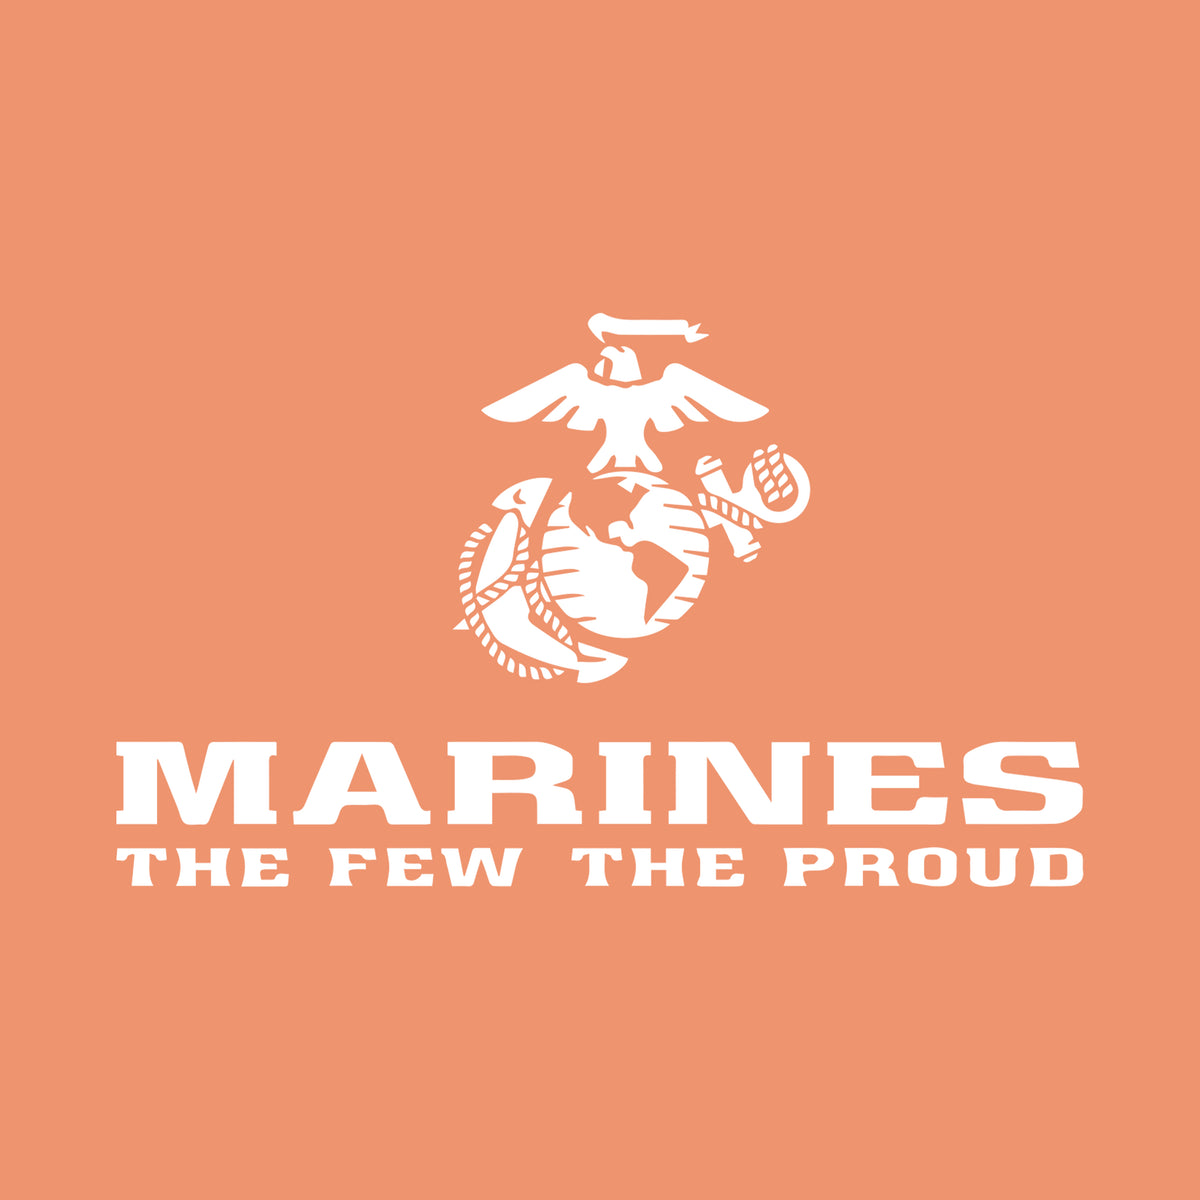 Marines The Few The Proud Chest Seal Tangerine T-Shirt